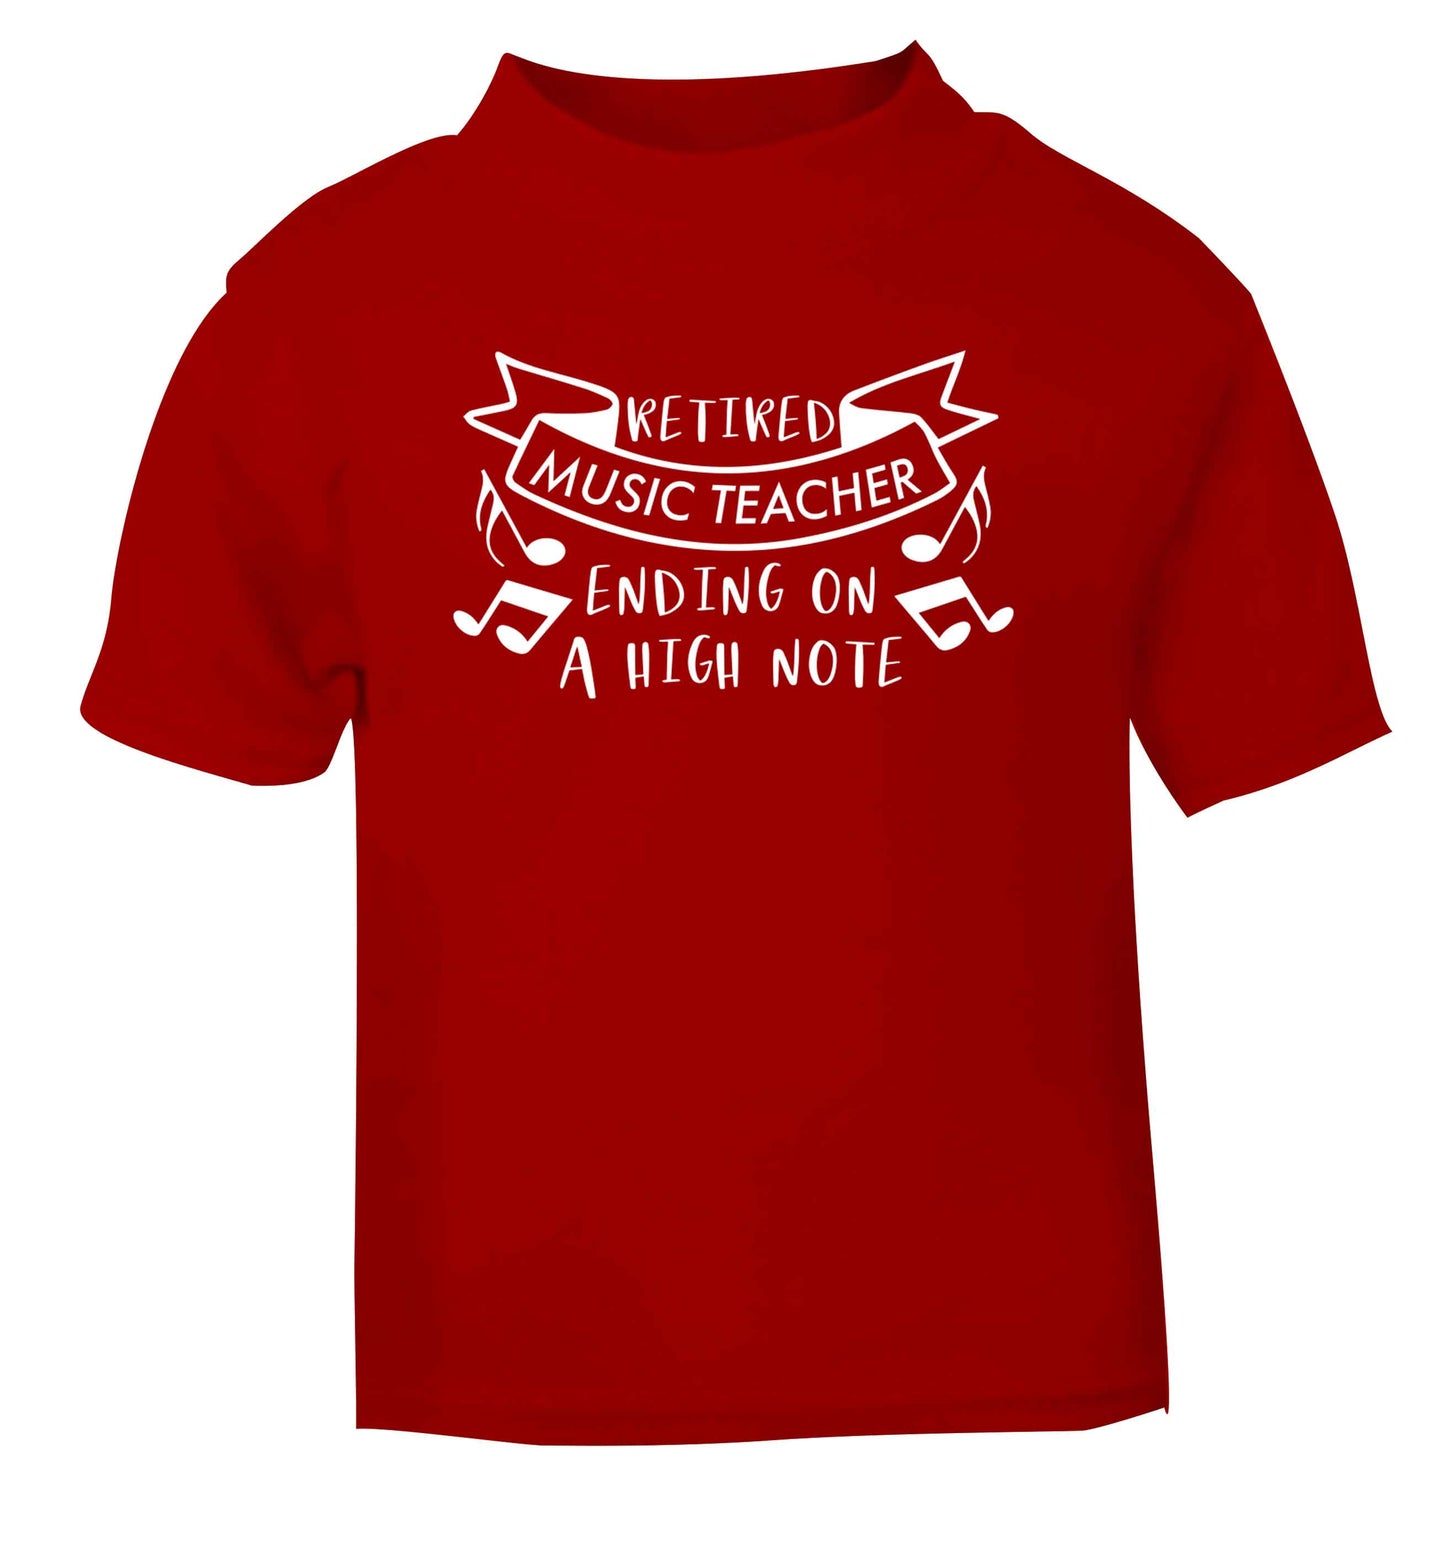 Retired music teacher ending on a high note red Baby Toddler Tshirt 2 Years